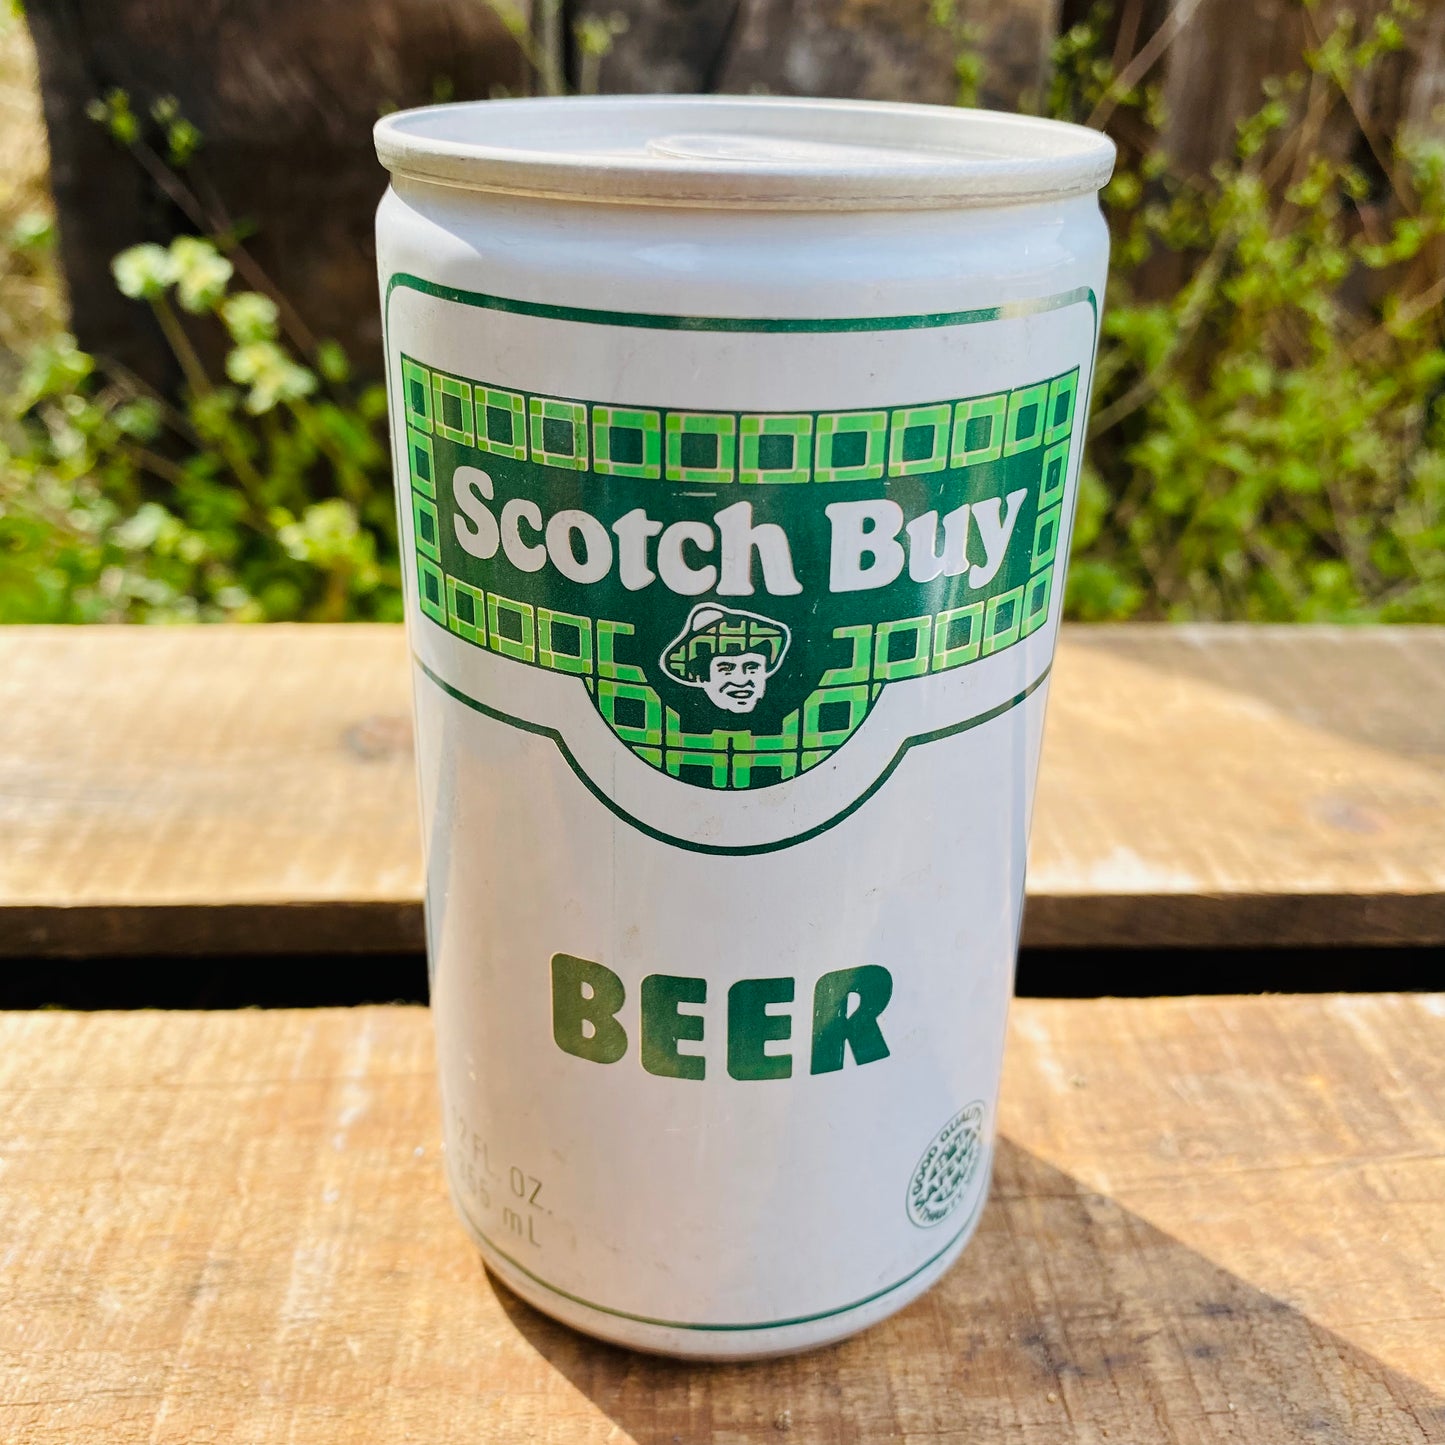 【USA vintage】Scotch Buy BEER ビール 缶